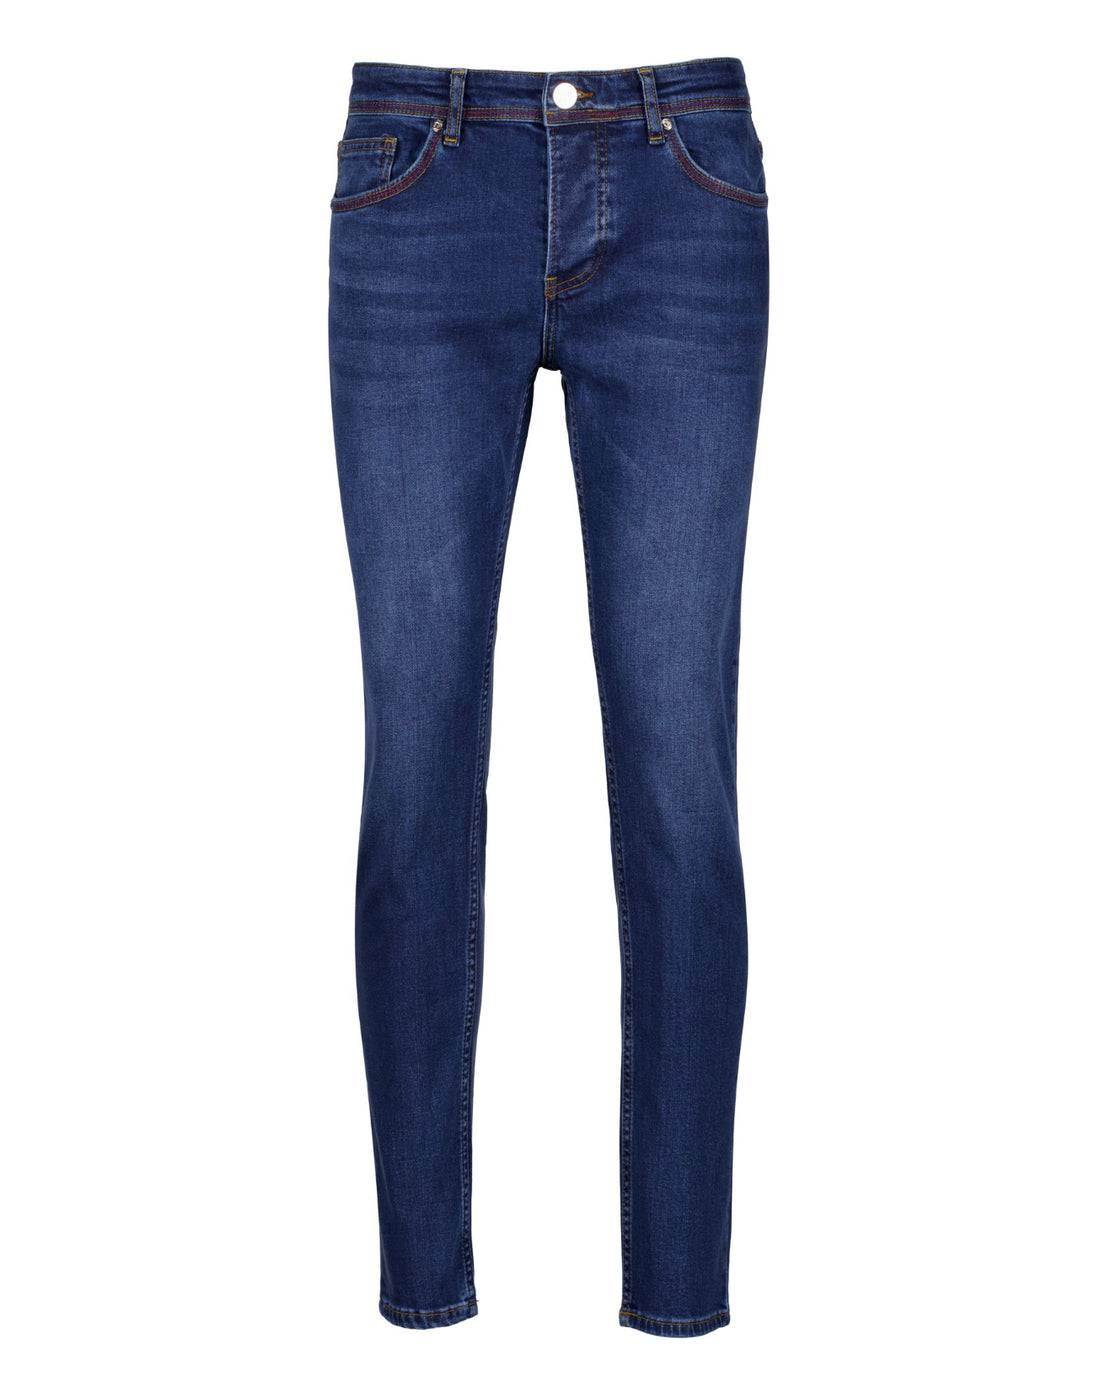 The Lukas Blue Classic Jeans - Jeans by Urbbana